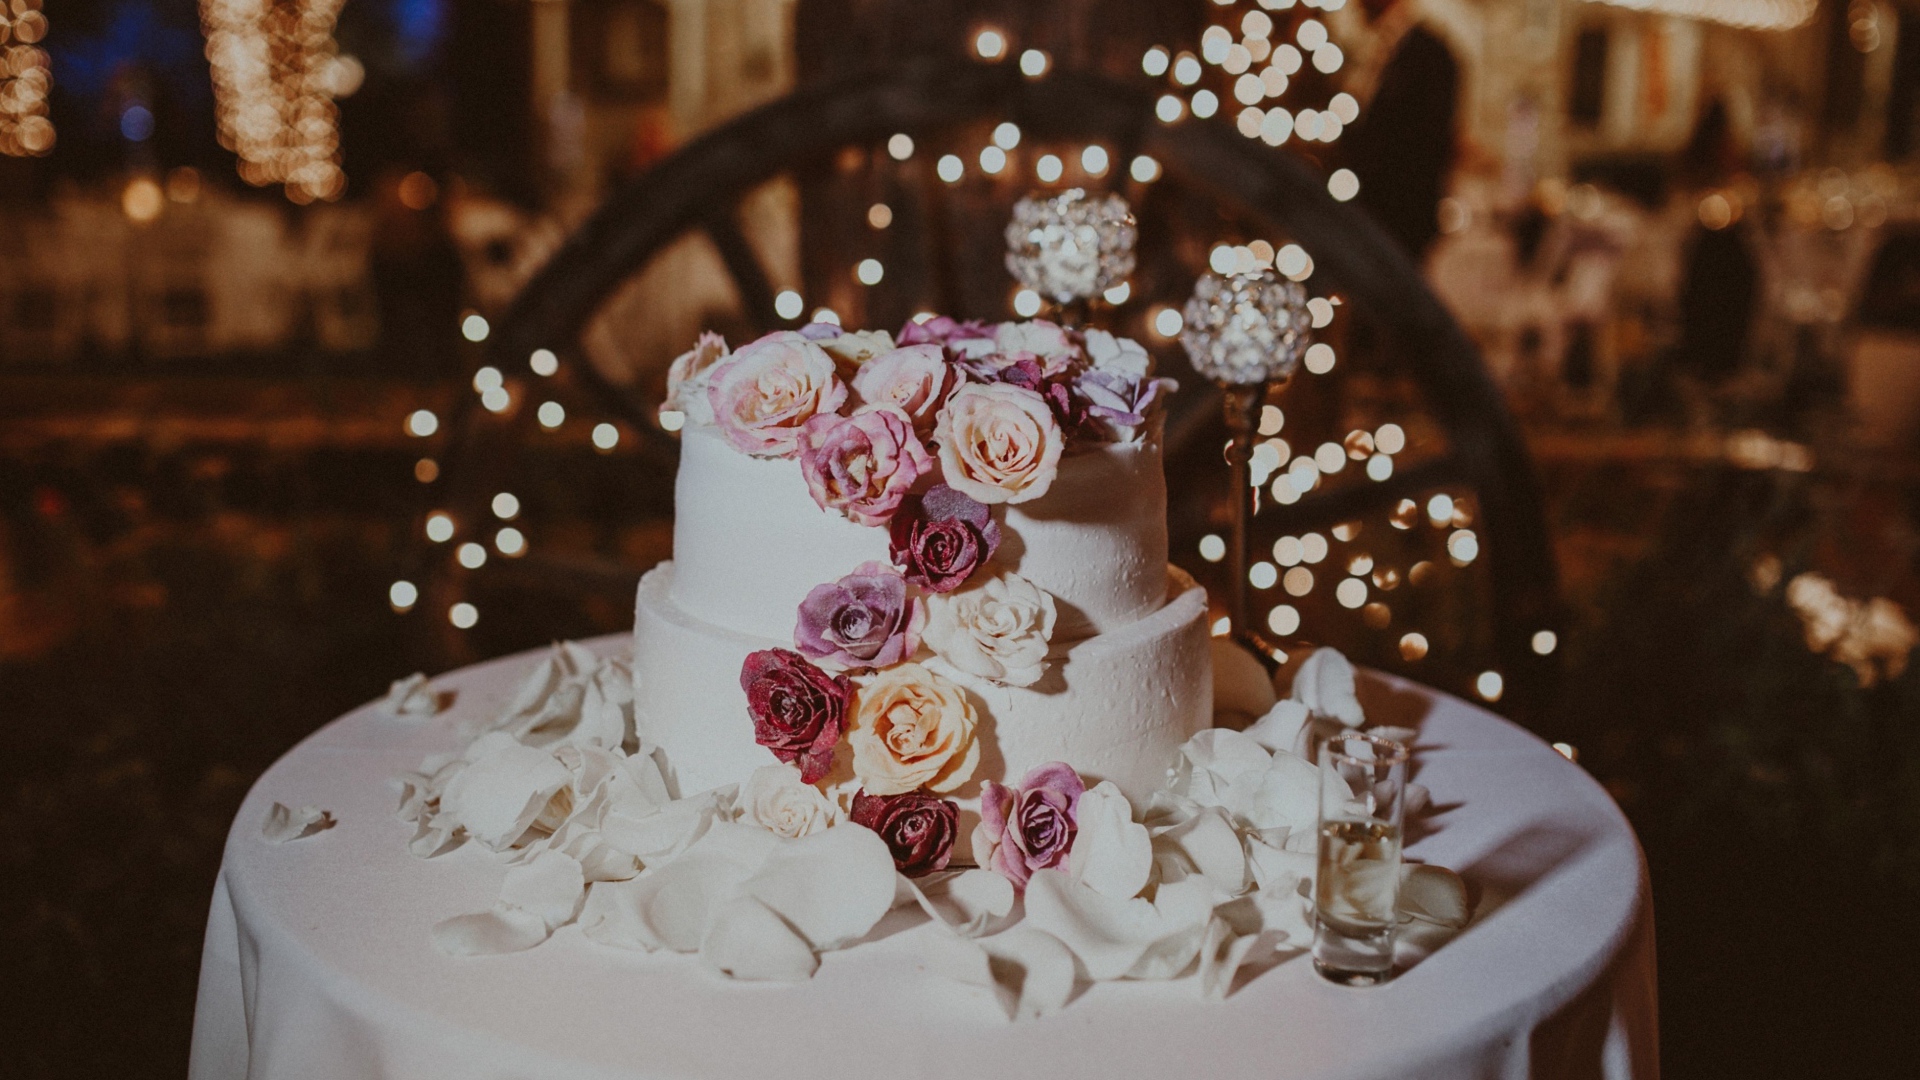 Beautiful wedding cake decorated with roses